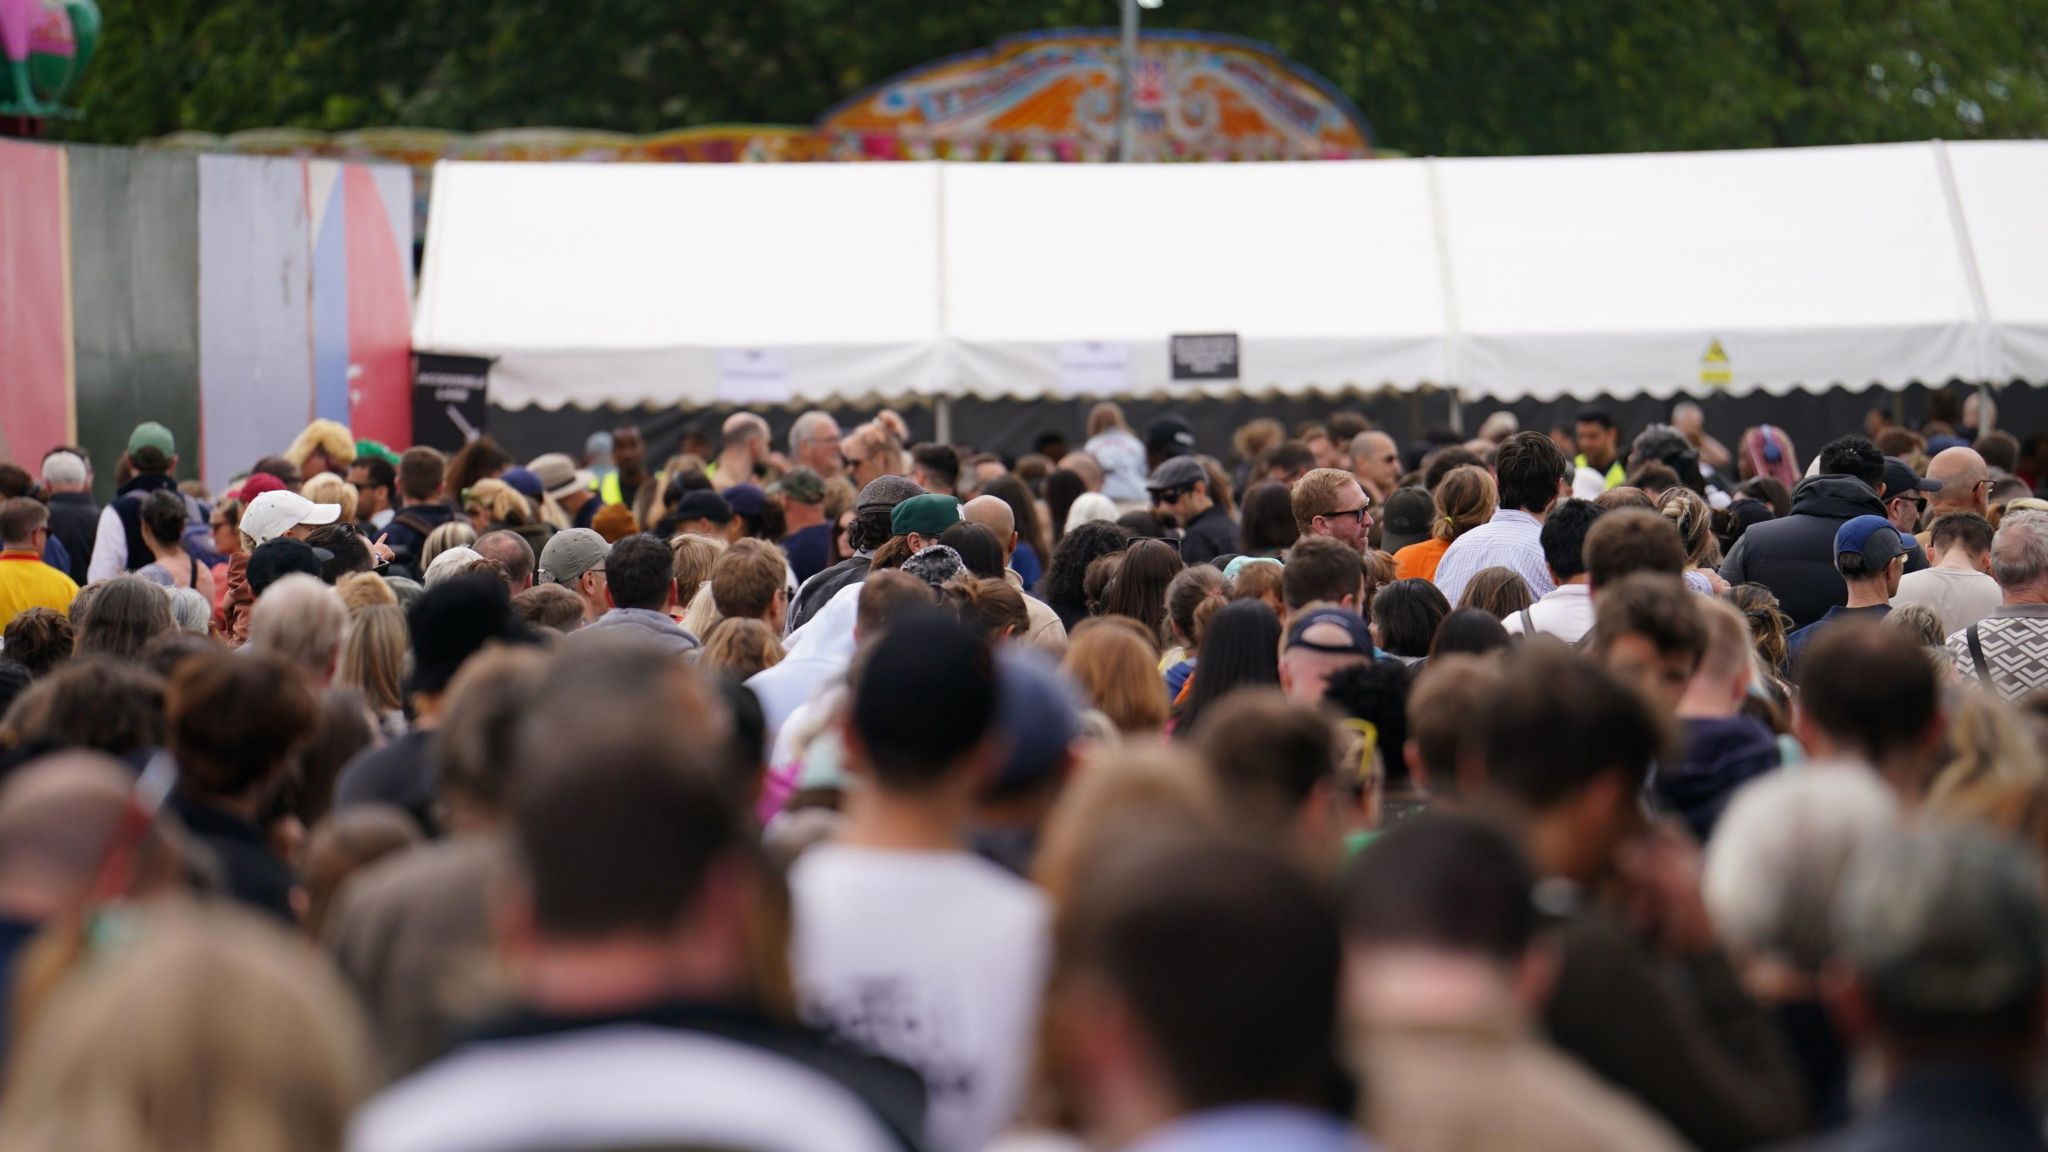 People attend the Lambeth Country Show 